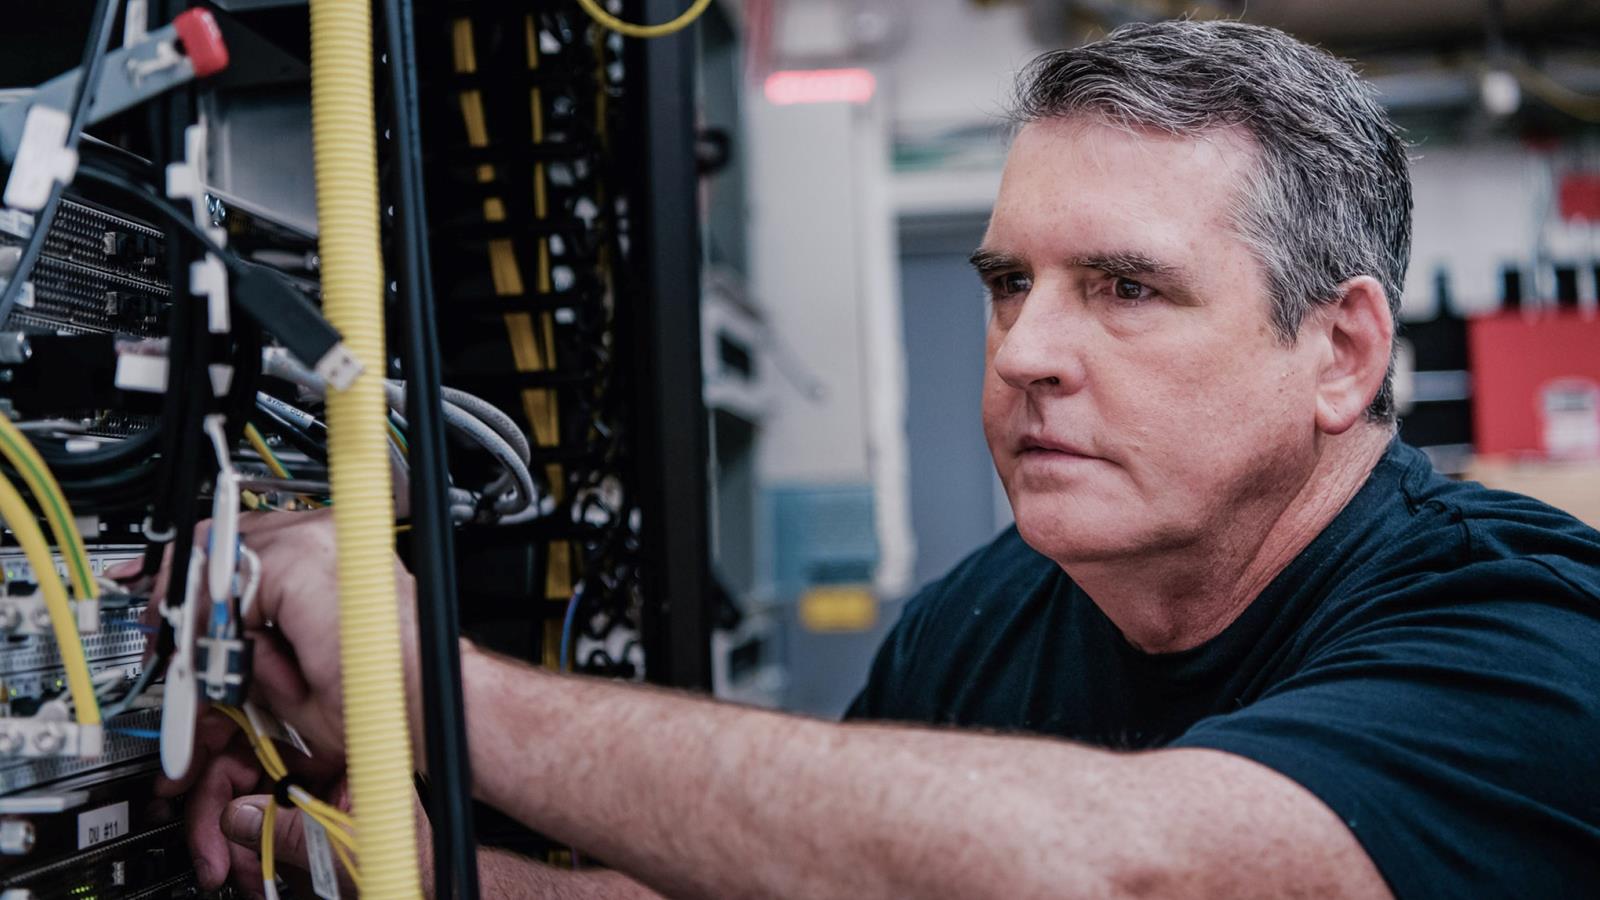 Close Up Of A Man Doing Some Wiring In A Server Room